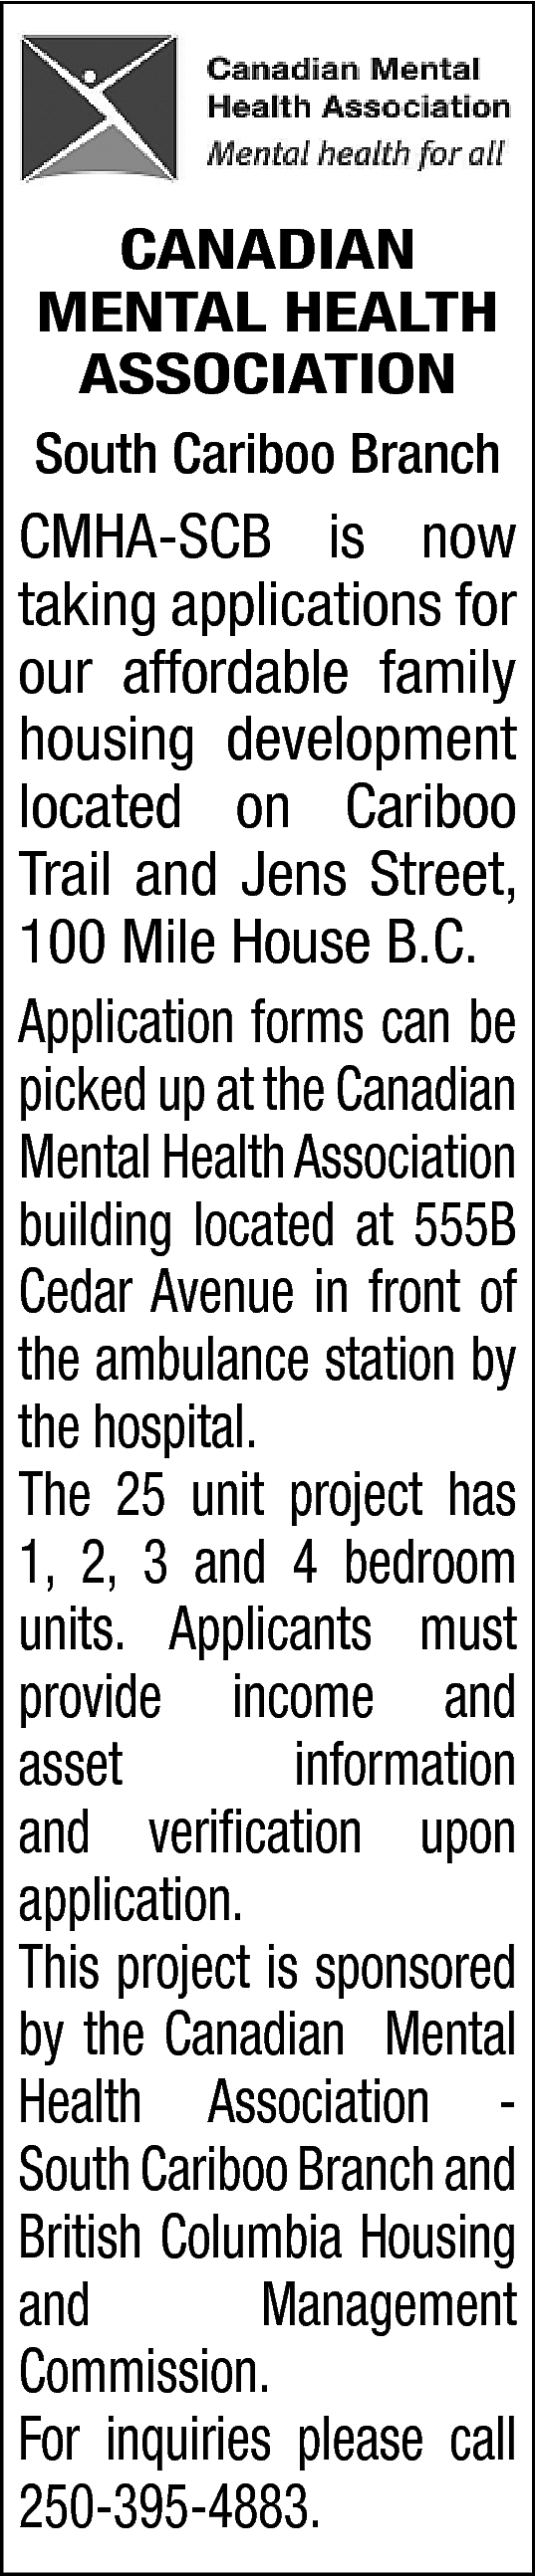 CANADIAN <br>MENTAL HEALTH <br>ASSOCIATION <br>South  CANADIAN  MENTAL HEALTH  ASSOCIATION  South Cariboo Branch    CMHA-SCB is now  taking applications for  our affordable family  housing development  located on Cariboo  Trail and Jens Street,  100 Mile House B.C.  Application forms can be  picked up at the Canadian  Mental Health Association  building located at 555B  Cedar Avenue in front of  the ambulance station by  the hospital.  The 25 unit project has  1, 2, 3 and 4 bedroom  units. Applicants must  provide income and  asset  information  and verification upon  application.  This project is sponsored  by the Canadian Mental  Health Association South Cariboo Branch and  British Columbia Housing  and  Management  Commission.  For inquiries please call  250-395-4883.    